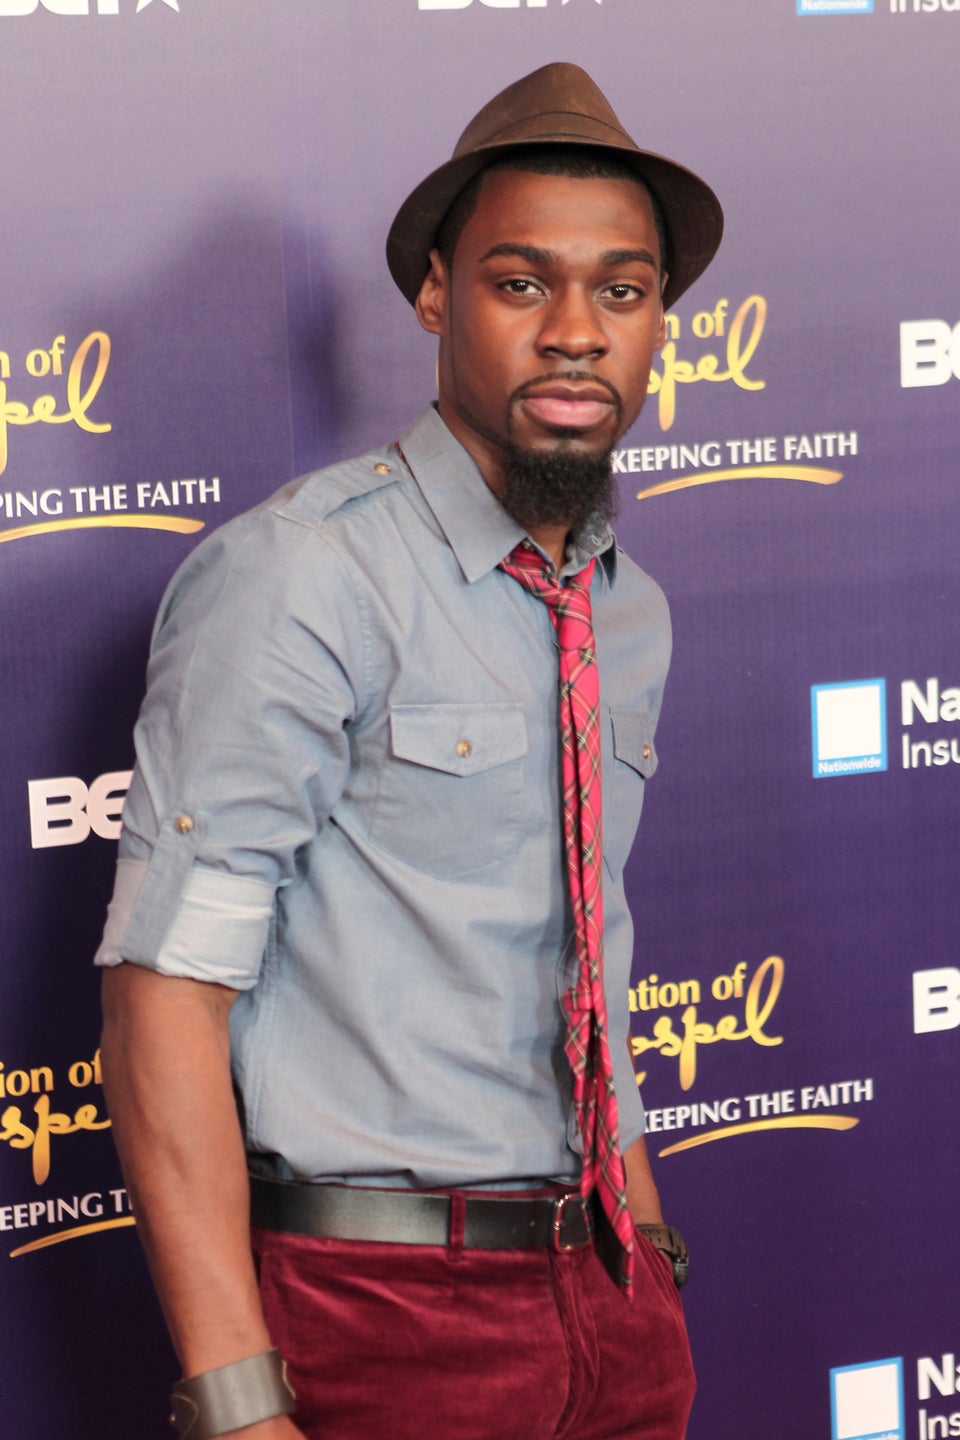 5 Questions with Gospel Star Mali Music on His Debut & Meeting Akon